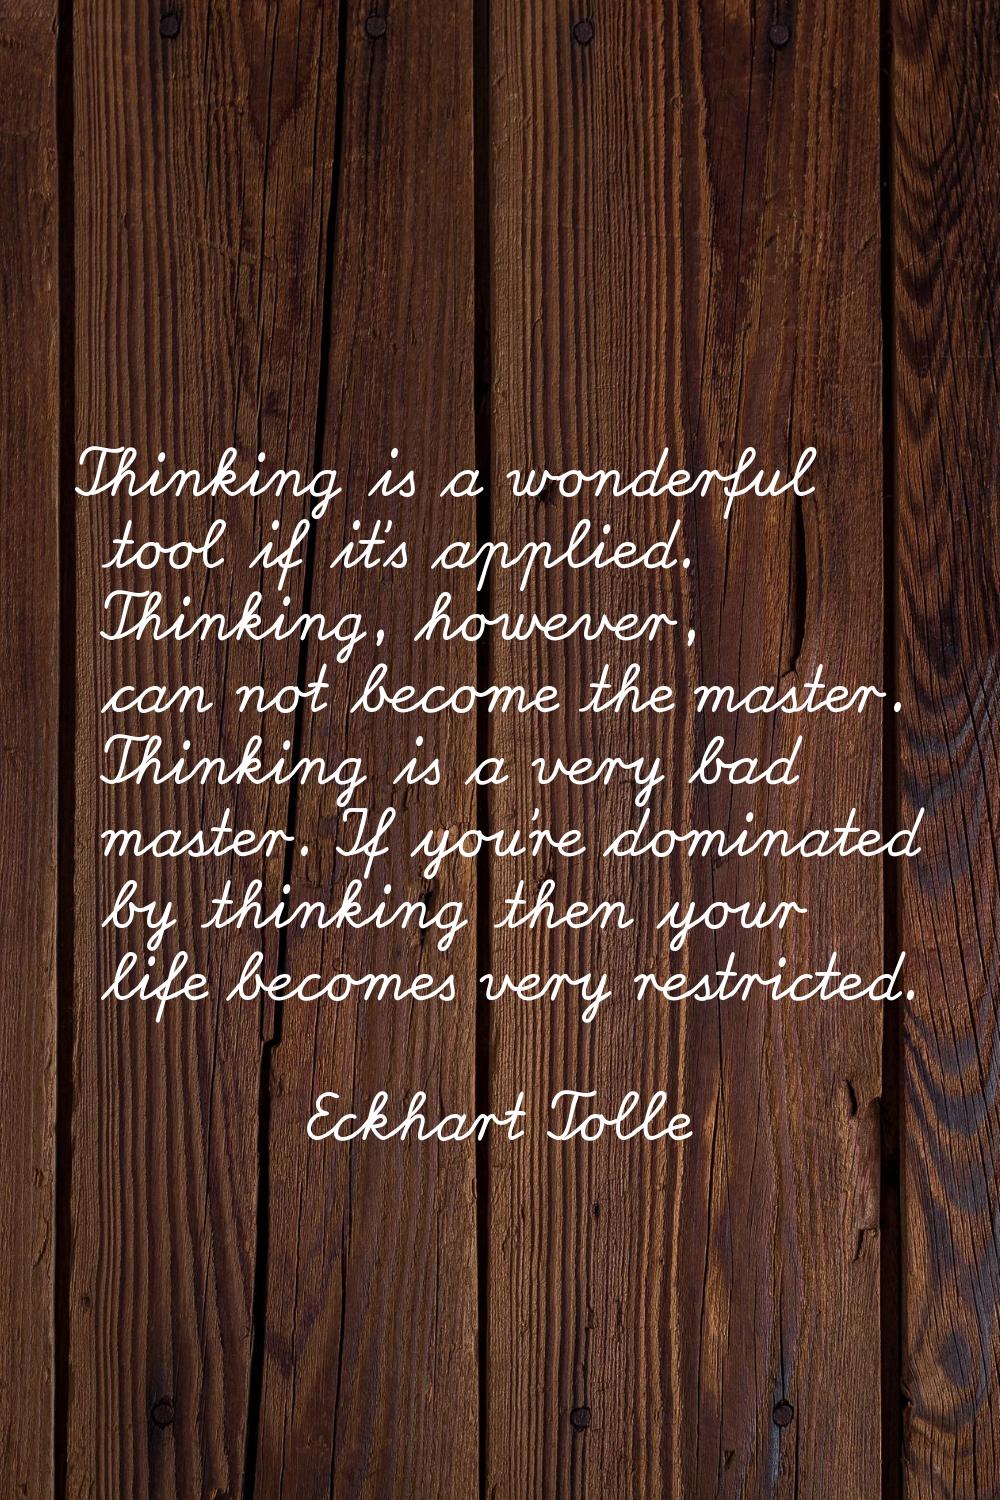 Thinking is a wonderful tool if it's applied. Thinking, however, can not become the master. Thinkin